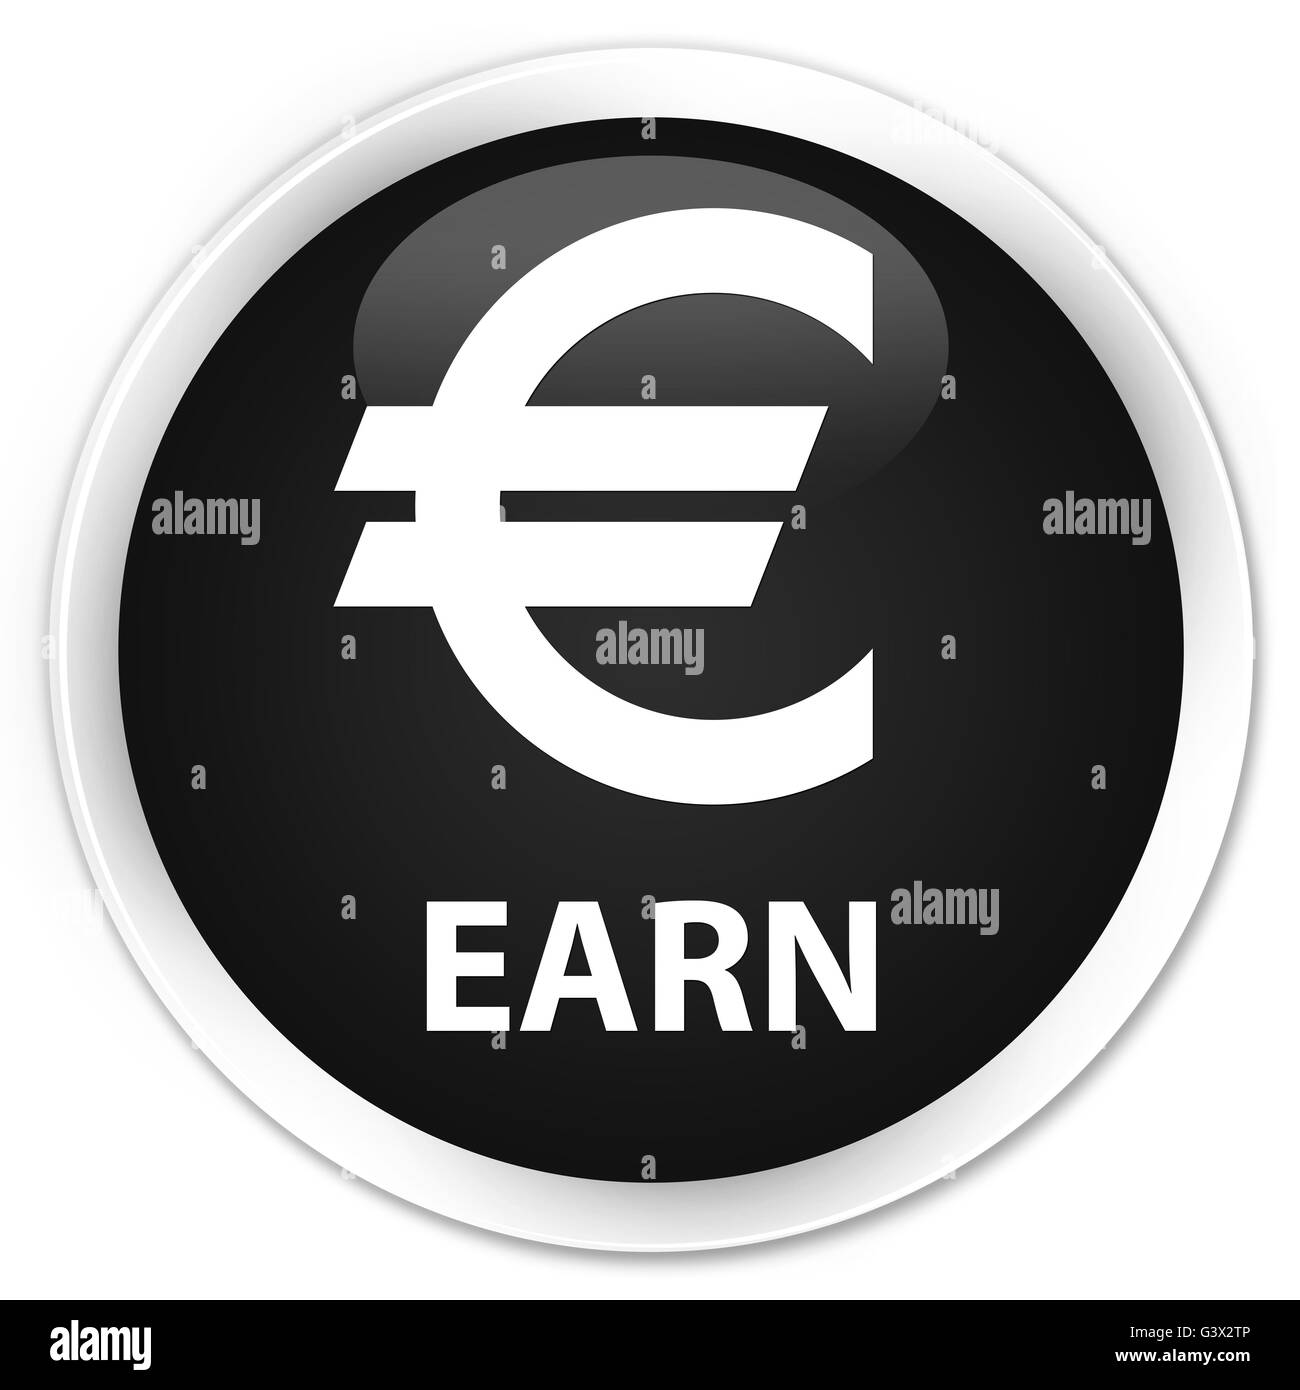 Earn (euro sign) isolated on premium black round button abstract illustration Stock Photo